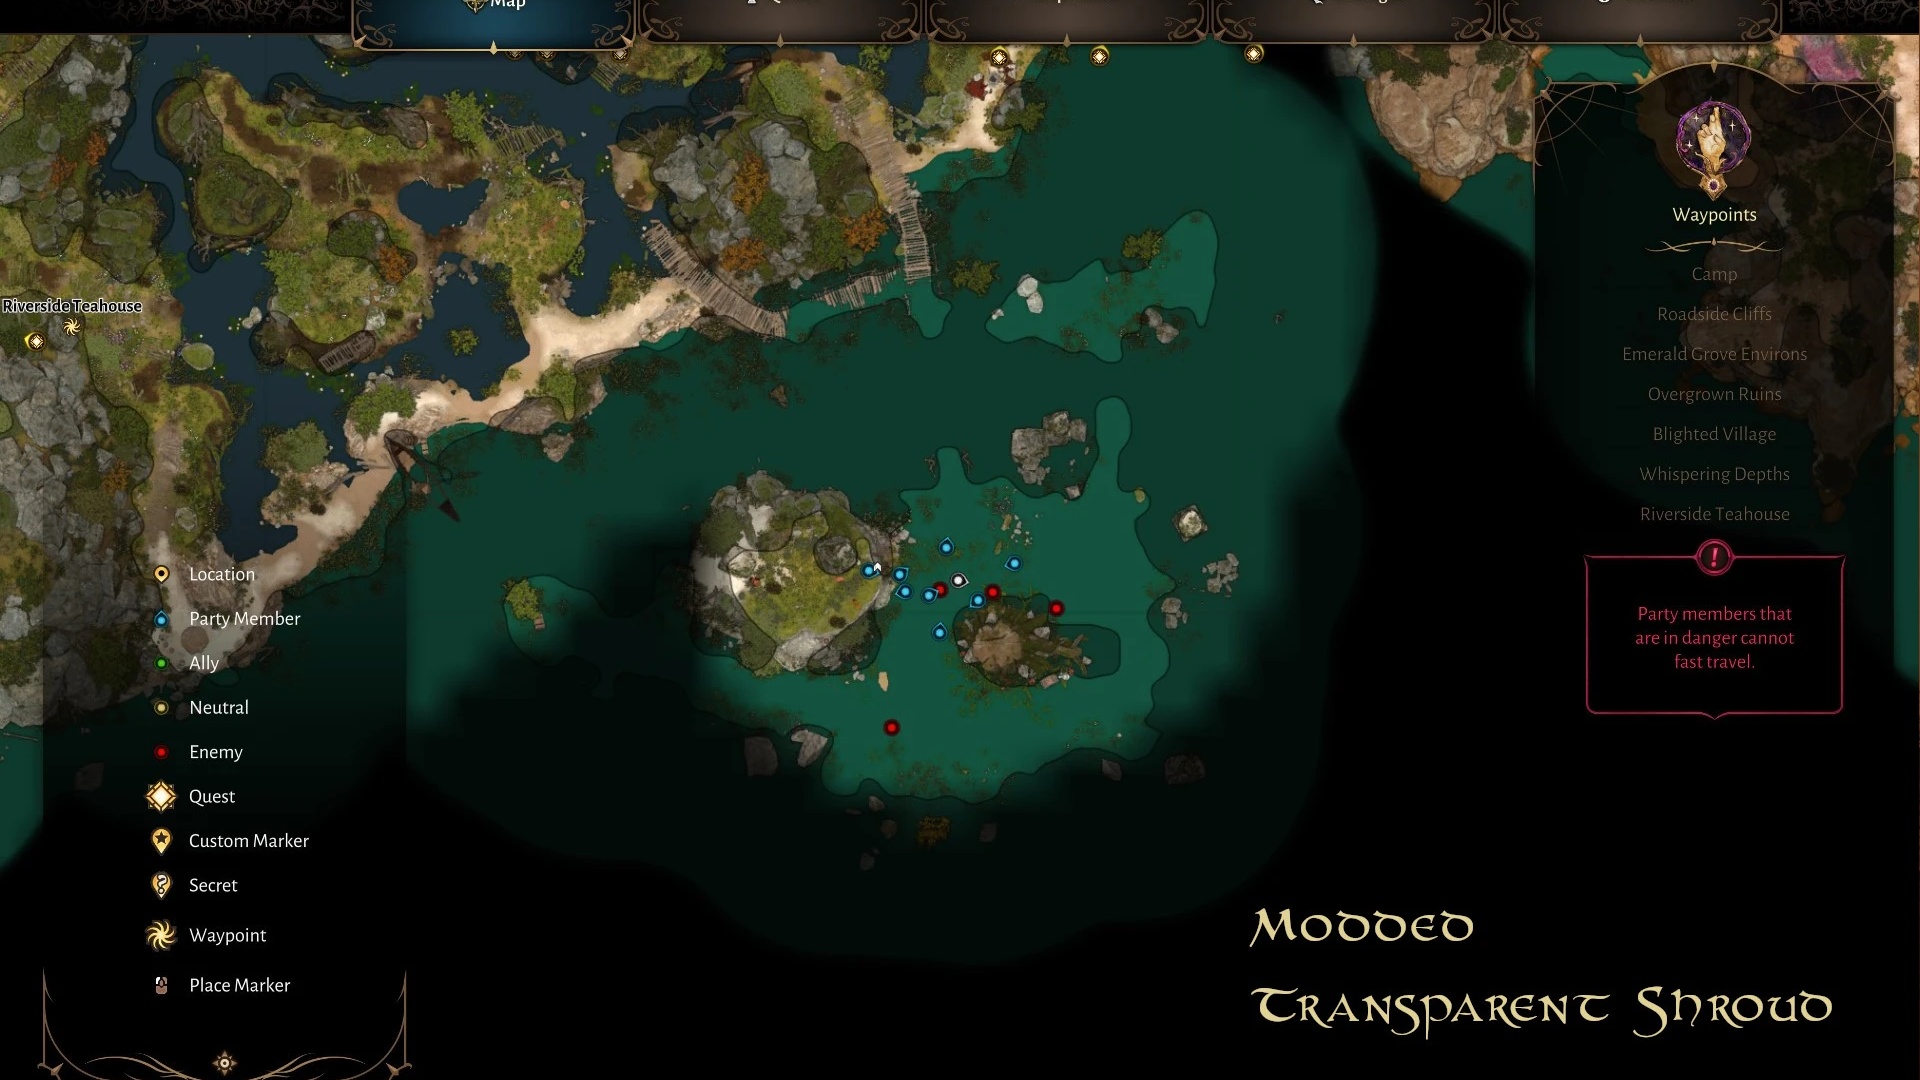 (And this is one of the possible variants of the modded map, image source: Caites)